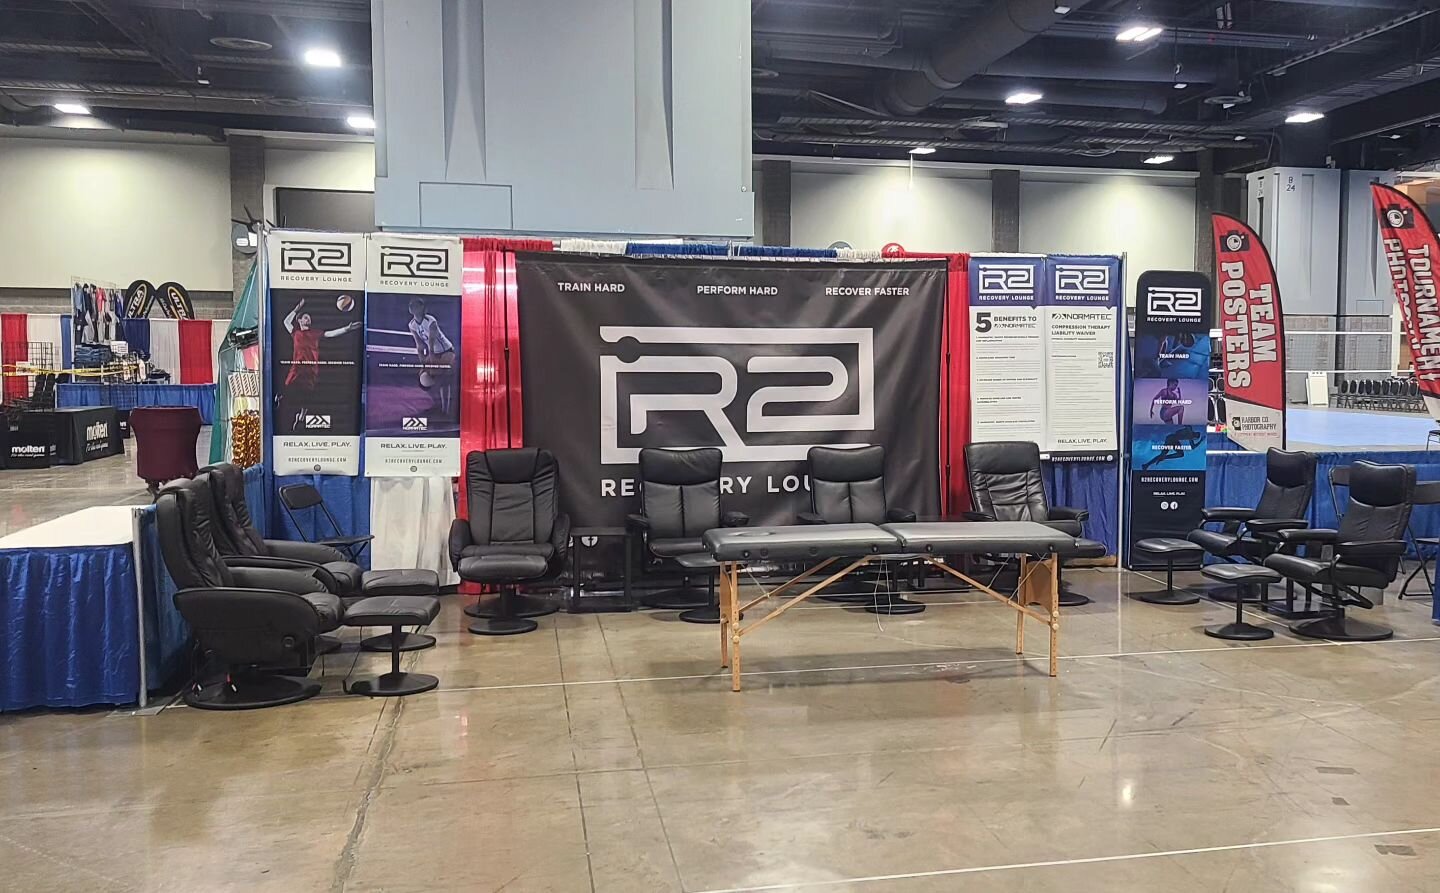 Interested in having the R2 Recovery Lounge at your event?  Contact us for more information.

Our mission is education parents and athletes on the importance of recovery, Health and wellness along with providing recovery solutions on-site. Athletes T